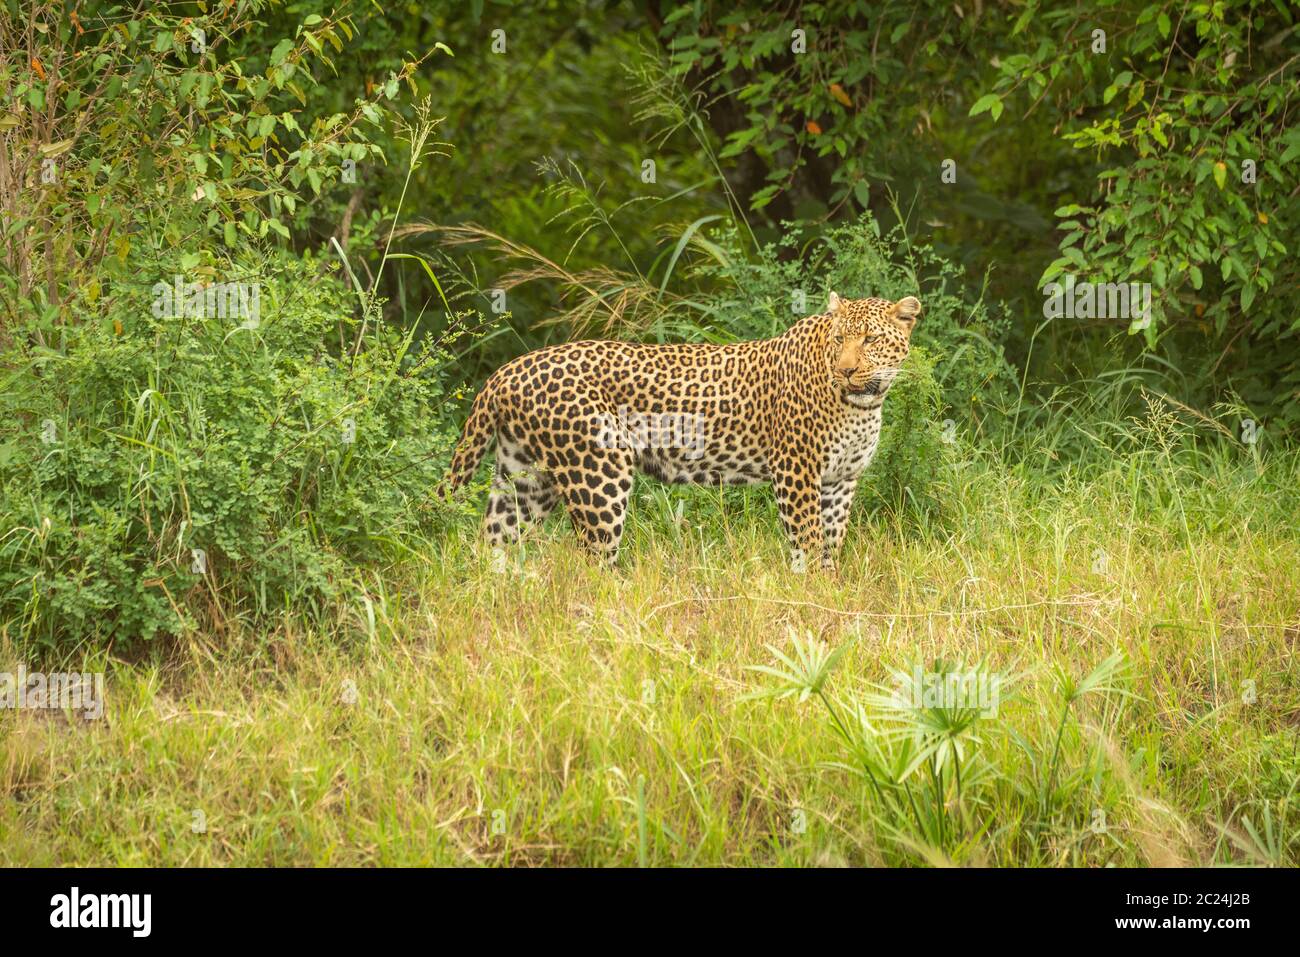 Leopard stands looking round with bushes behind Stock Photo